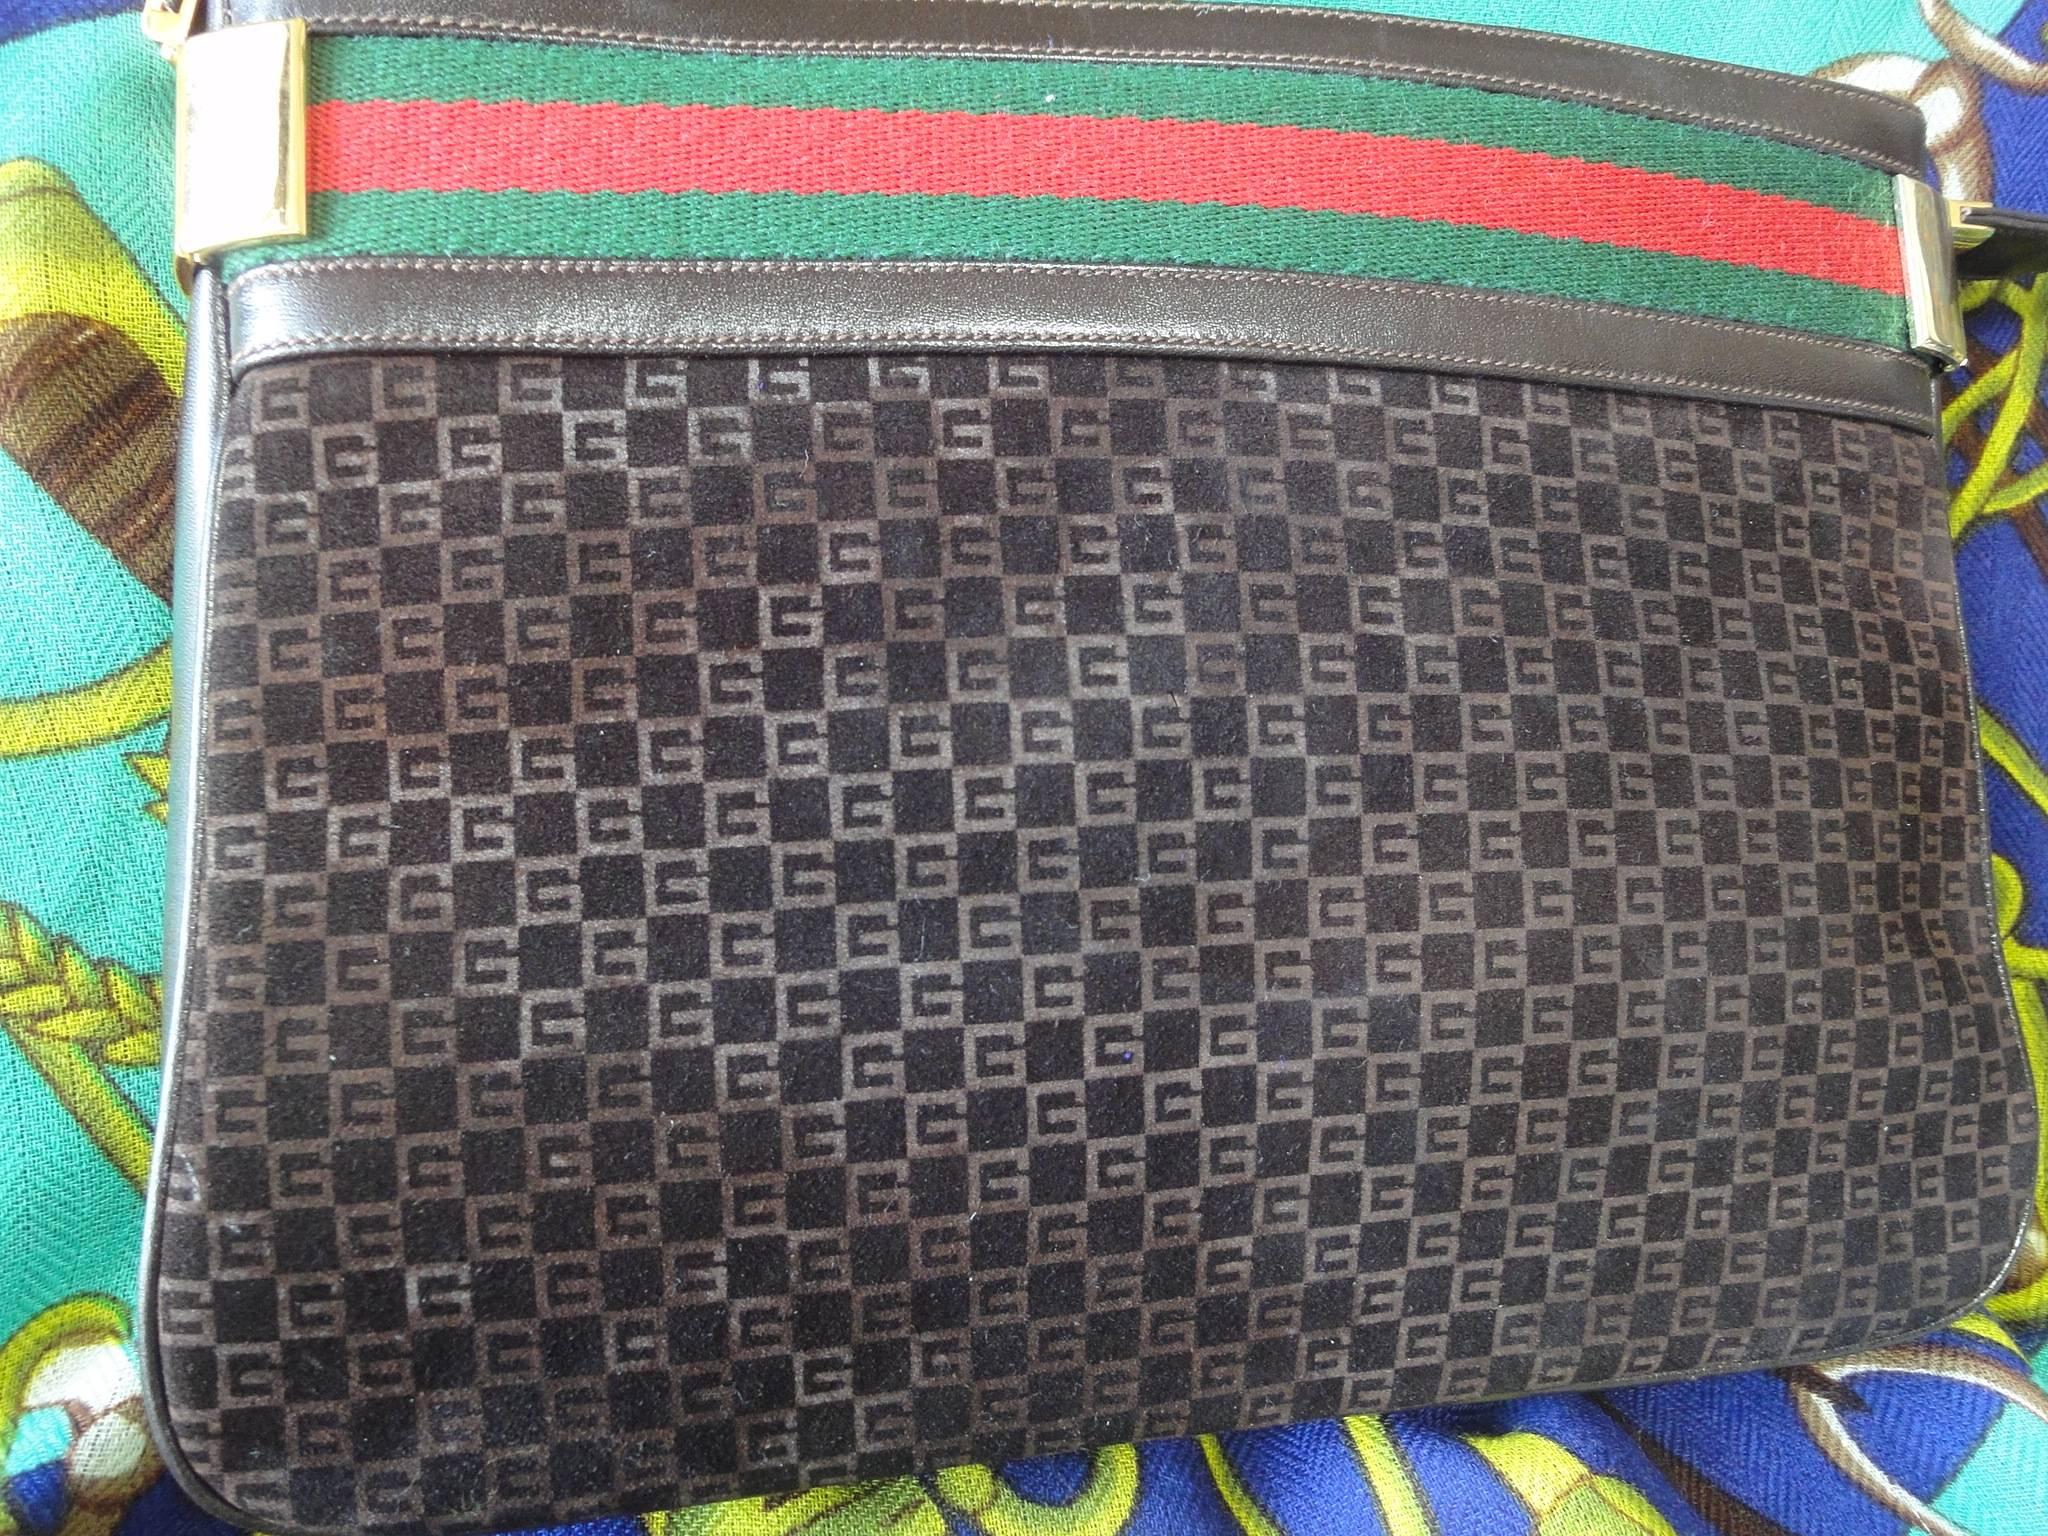 Vintage Gucci dark brown suede GG print shoulder bag with sherry line webbing, green and red. Rare masterpiece purse

Here is another fabulous and stunning Gucci vintage masterpiece from 80s!
If you are the vintage Gucci collector, then this is